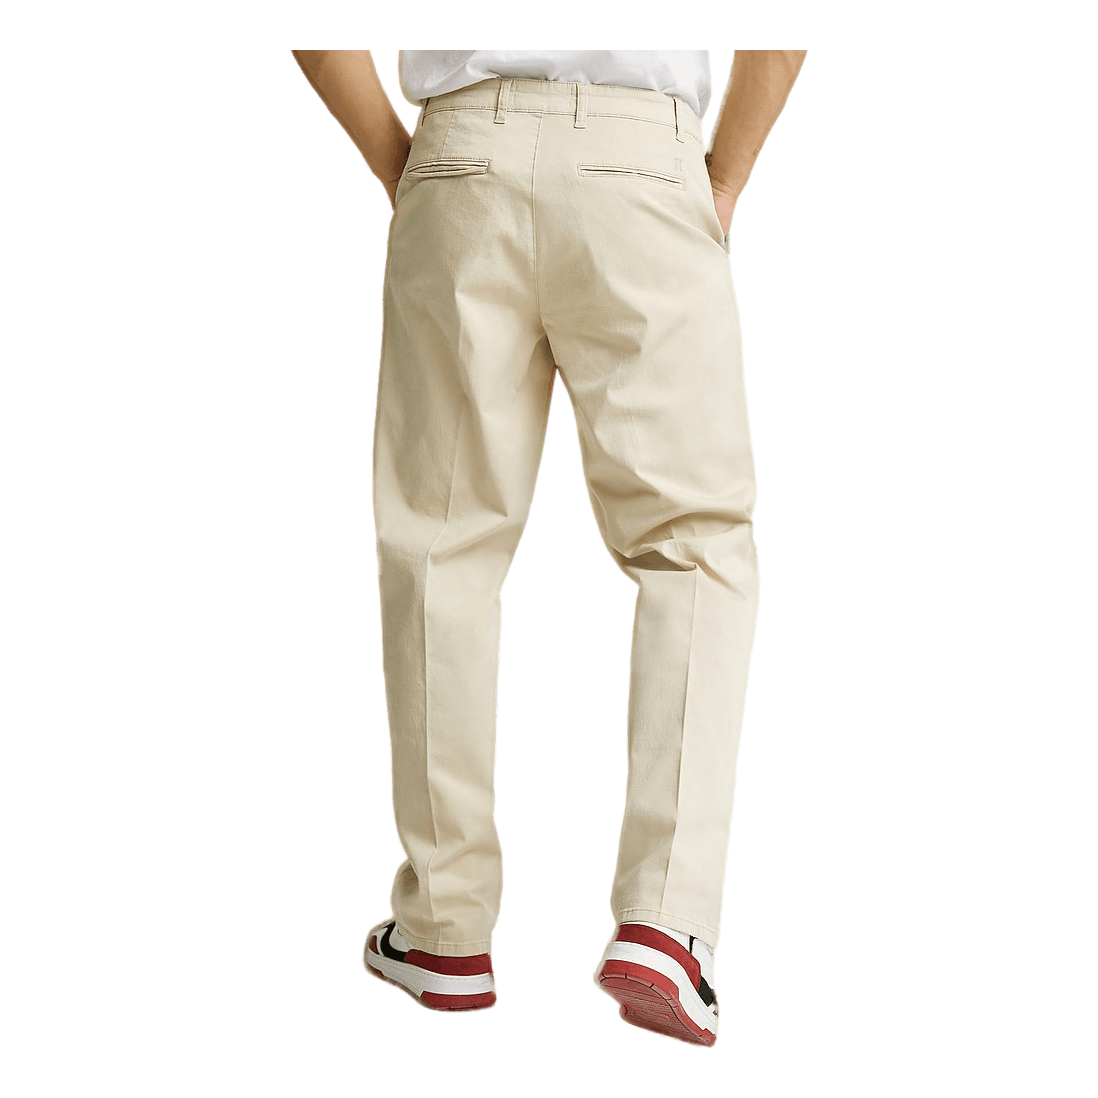 Paul Cotton Pants Oyster Gray